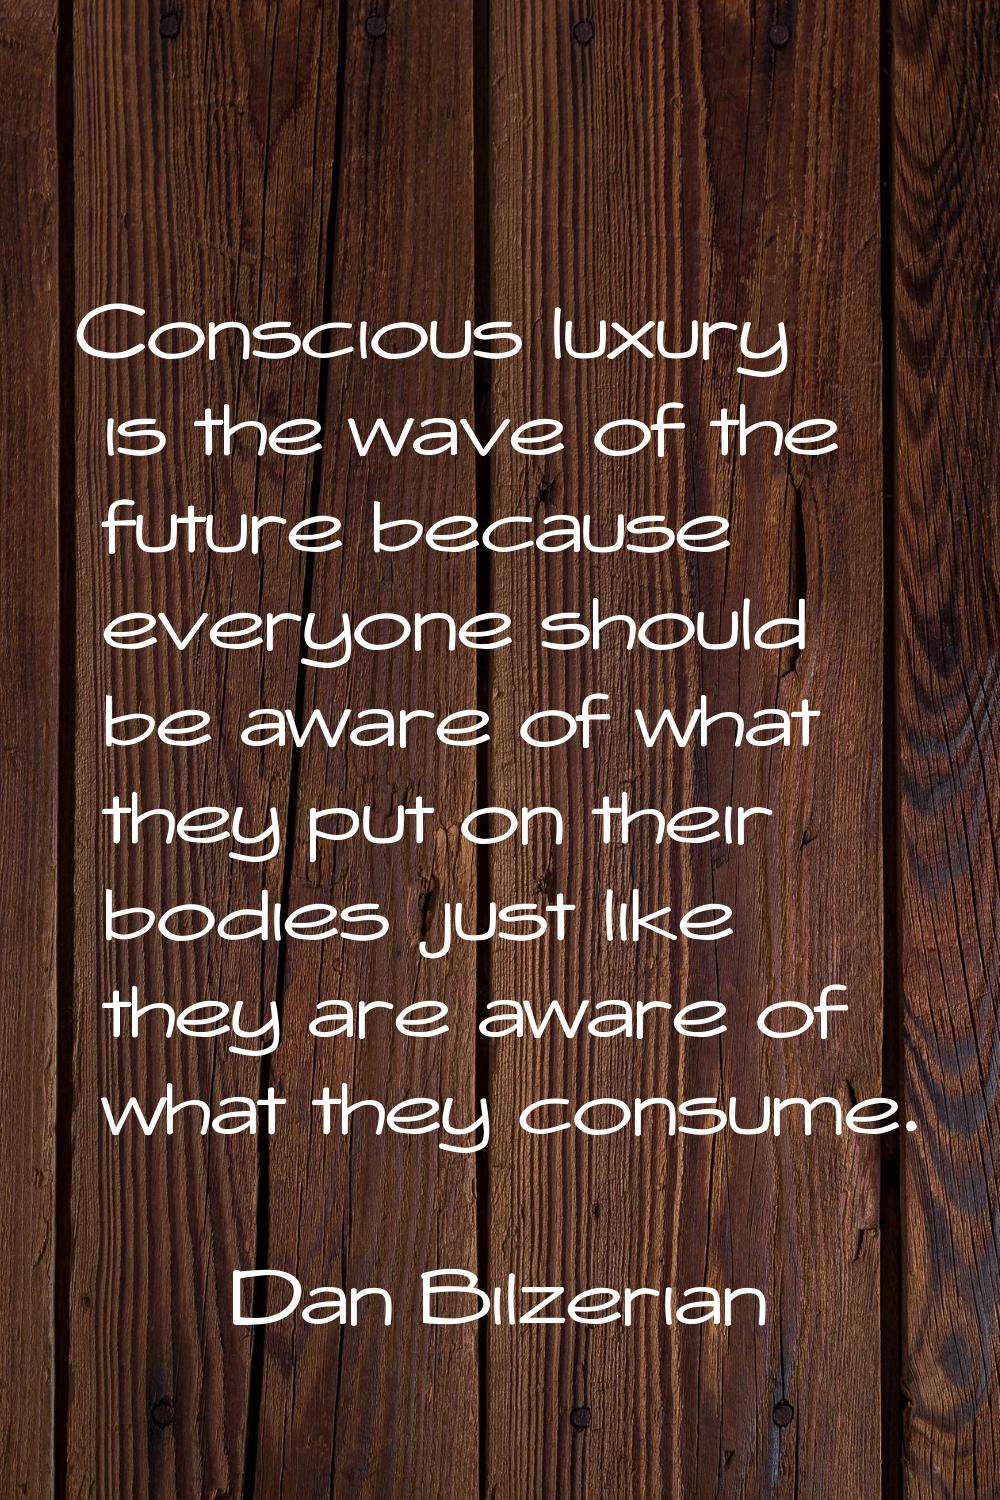 Conscious luxury is the wave of the future because everyone should be aware of what they put on the